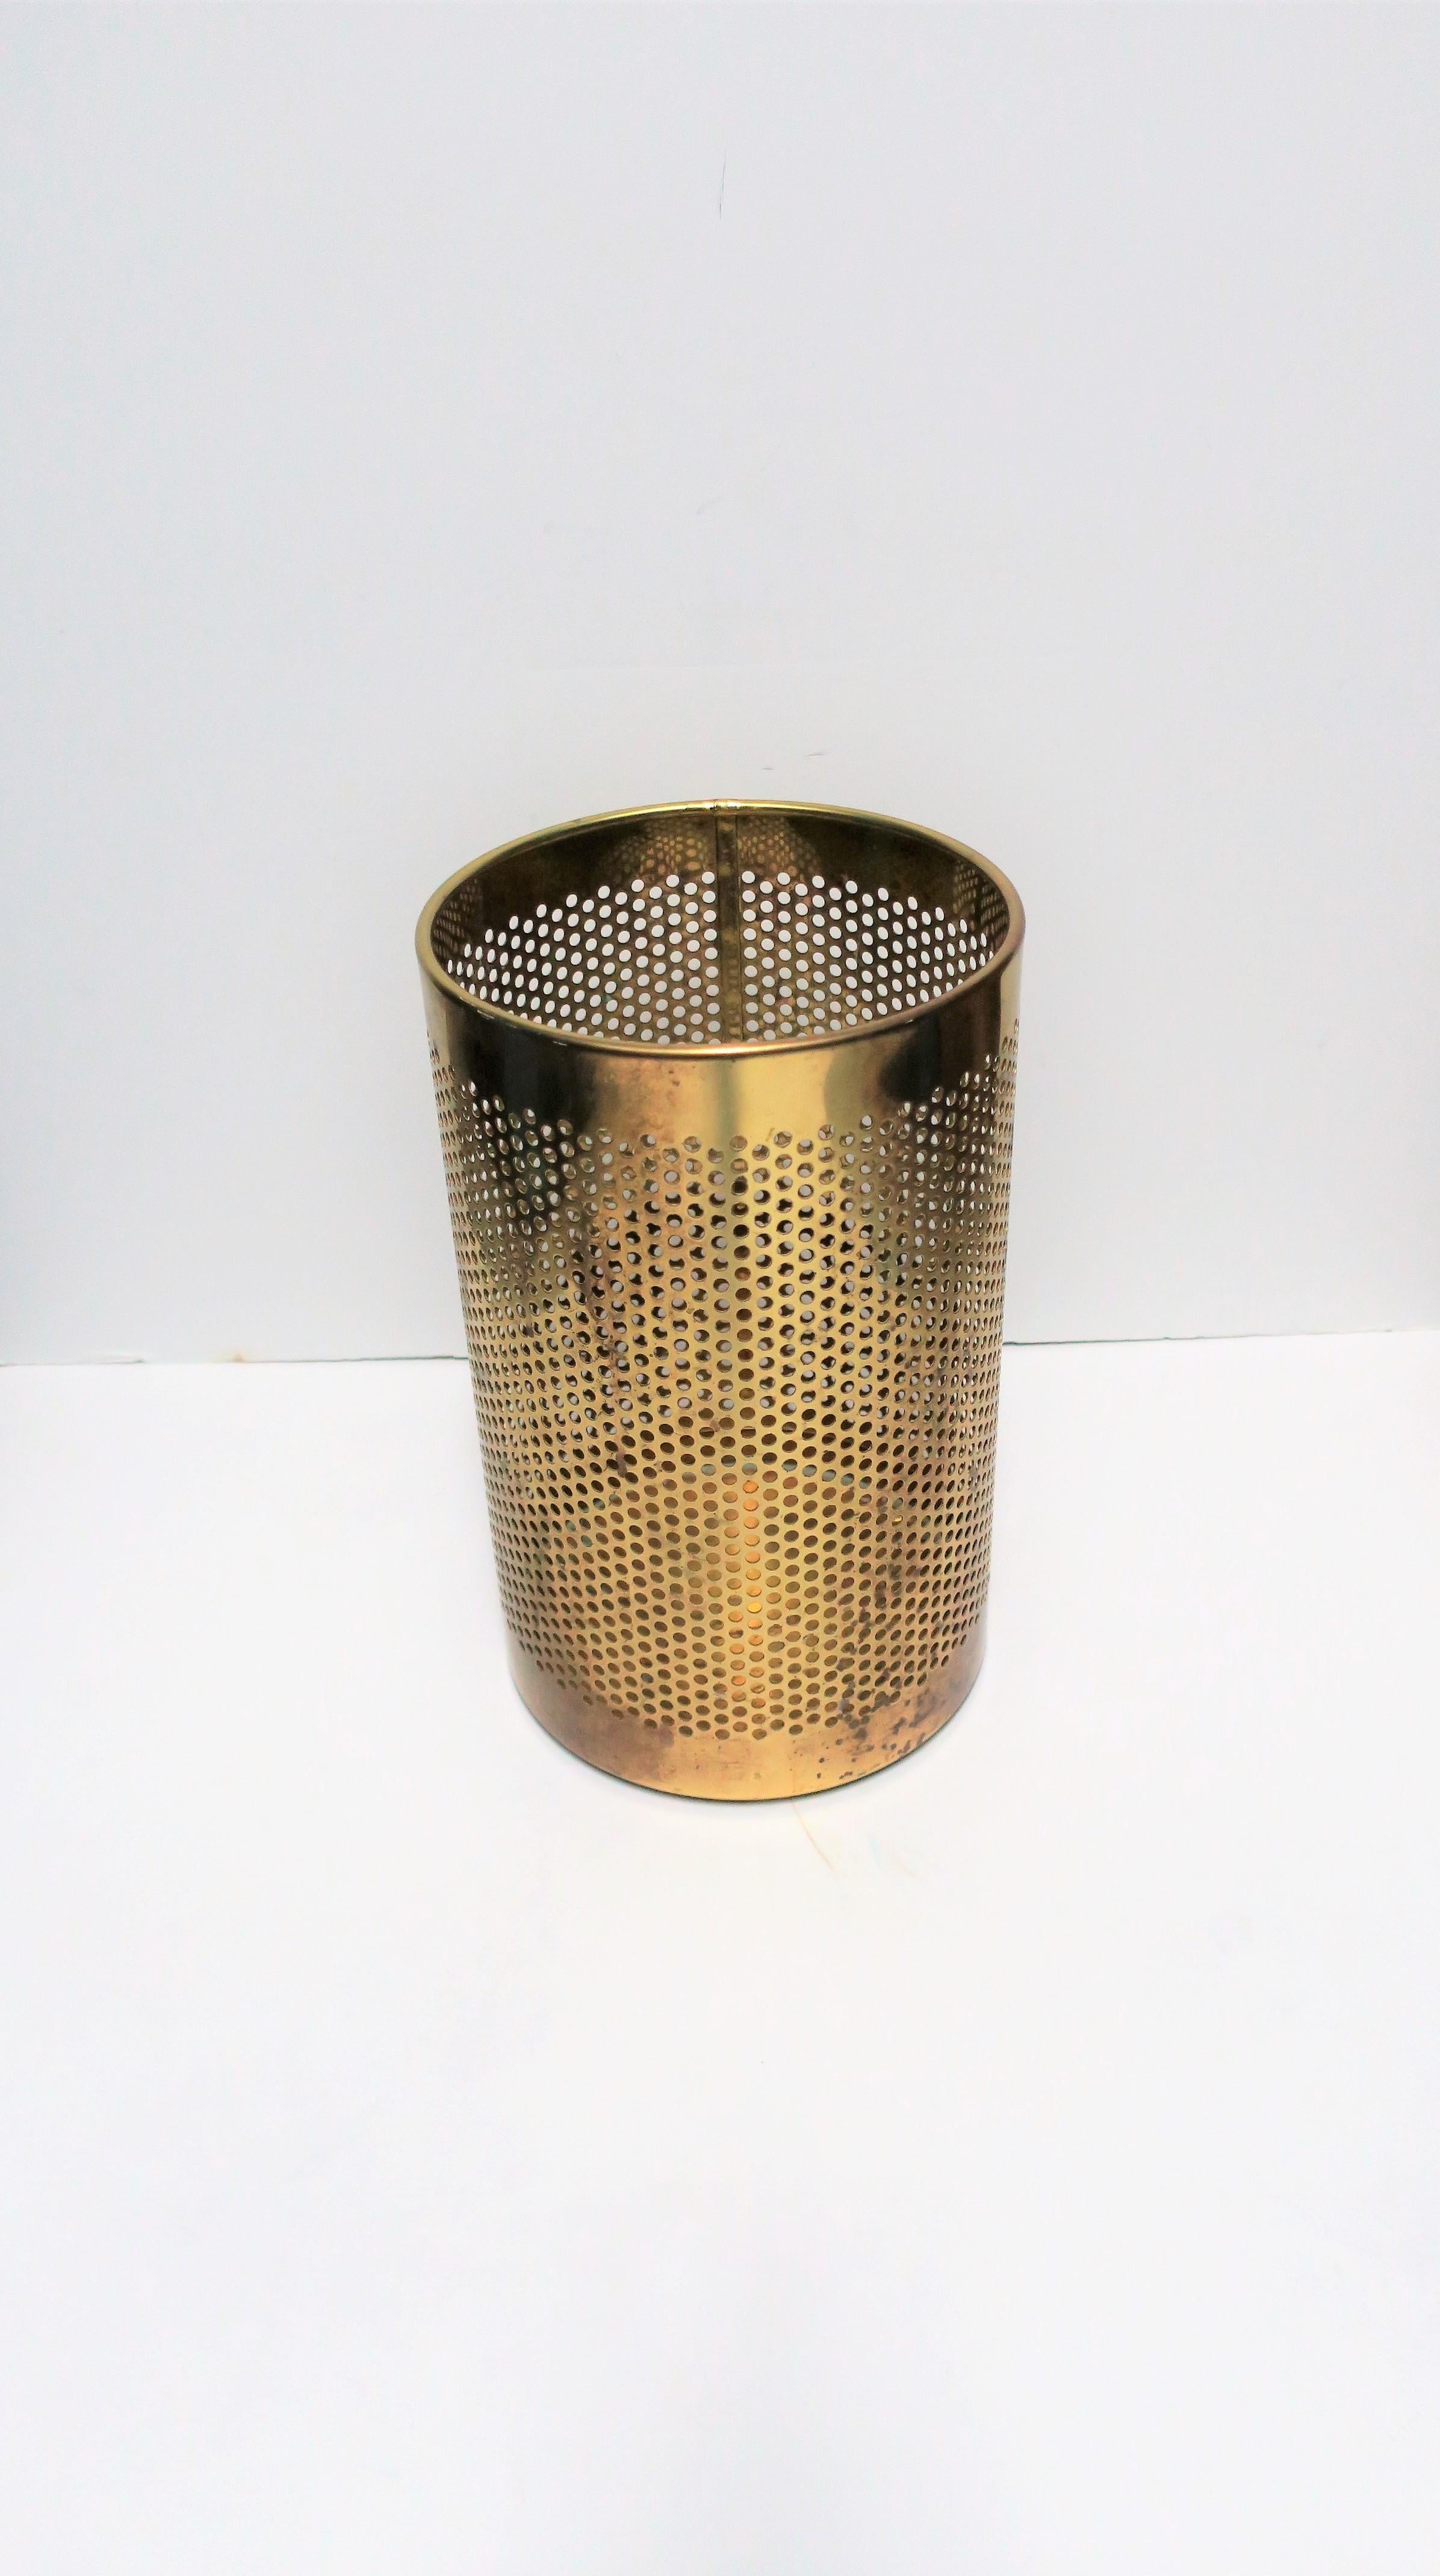 A beautiful vintage Italian brass perforated wastebasket or trash can, marked made in Italy on bottom as show in image #4, circa late 20th century, Italy. This round brass waste basket's design is comprised of small round perforated circles.